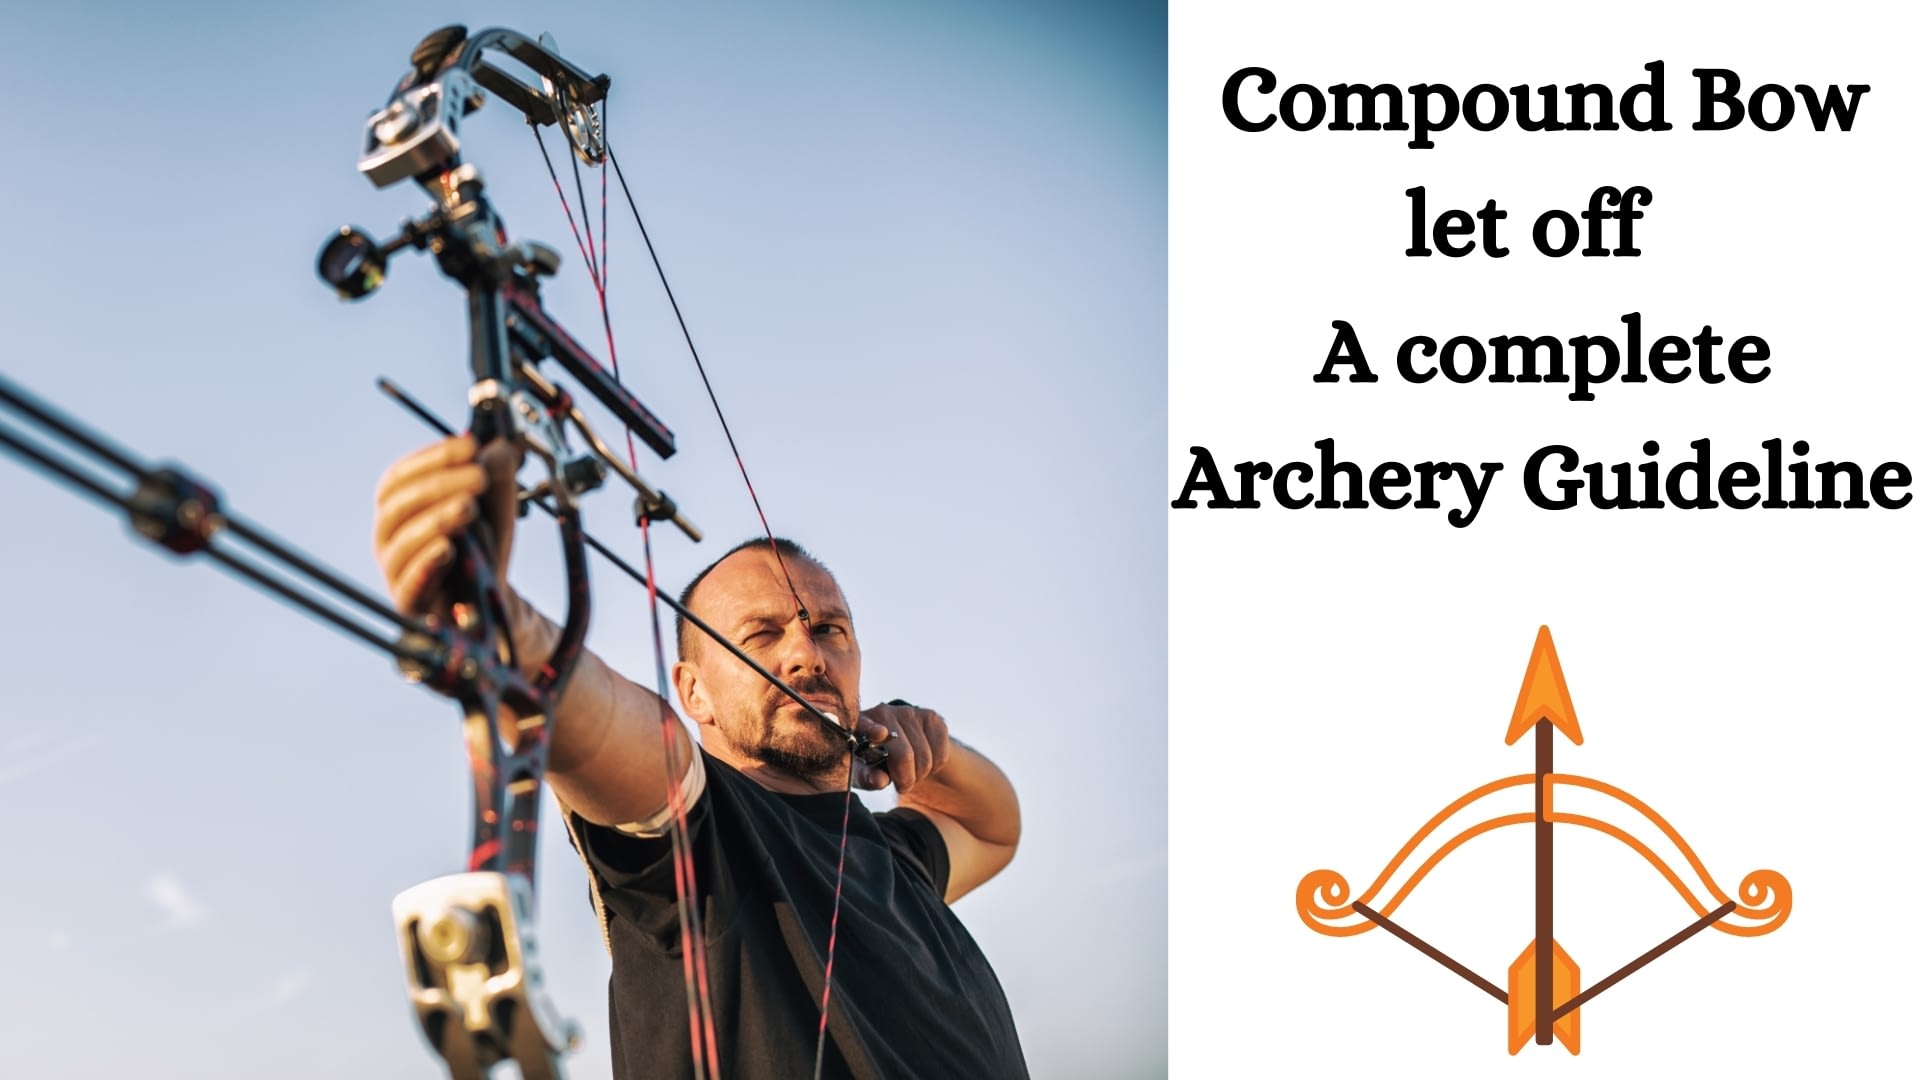 Compound Bow let off